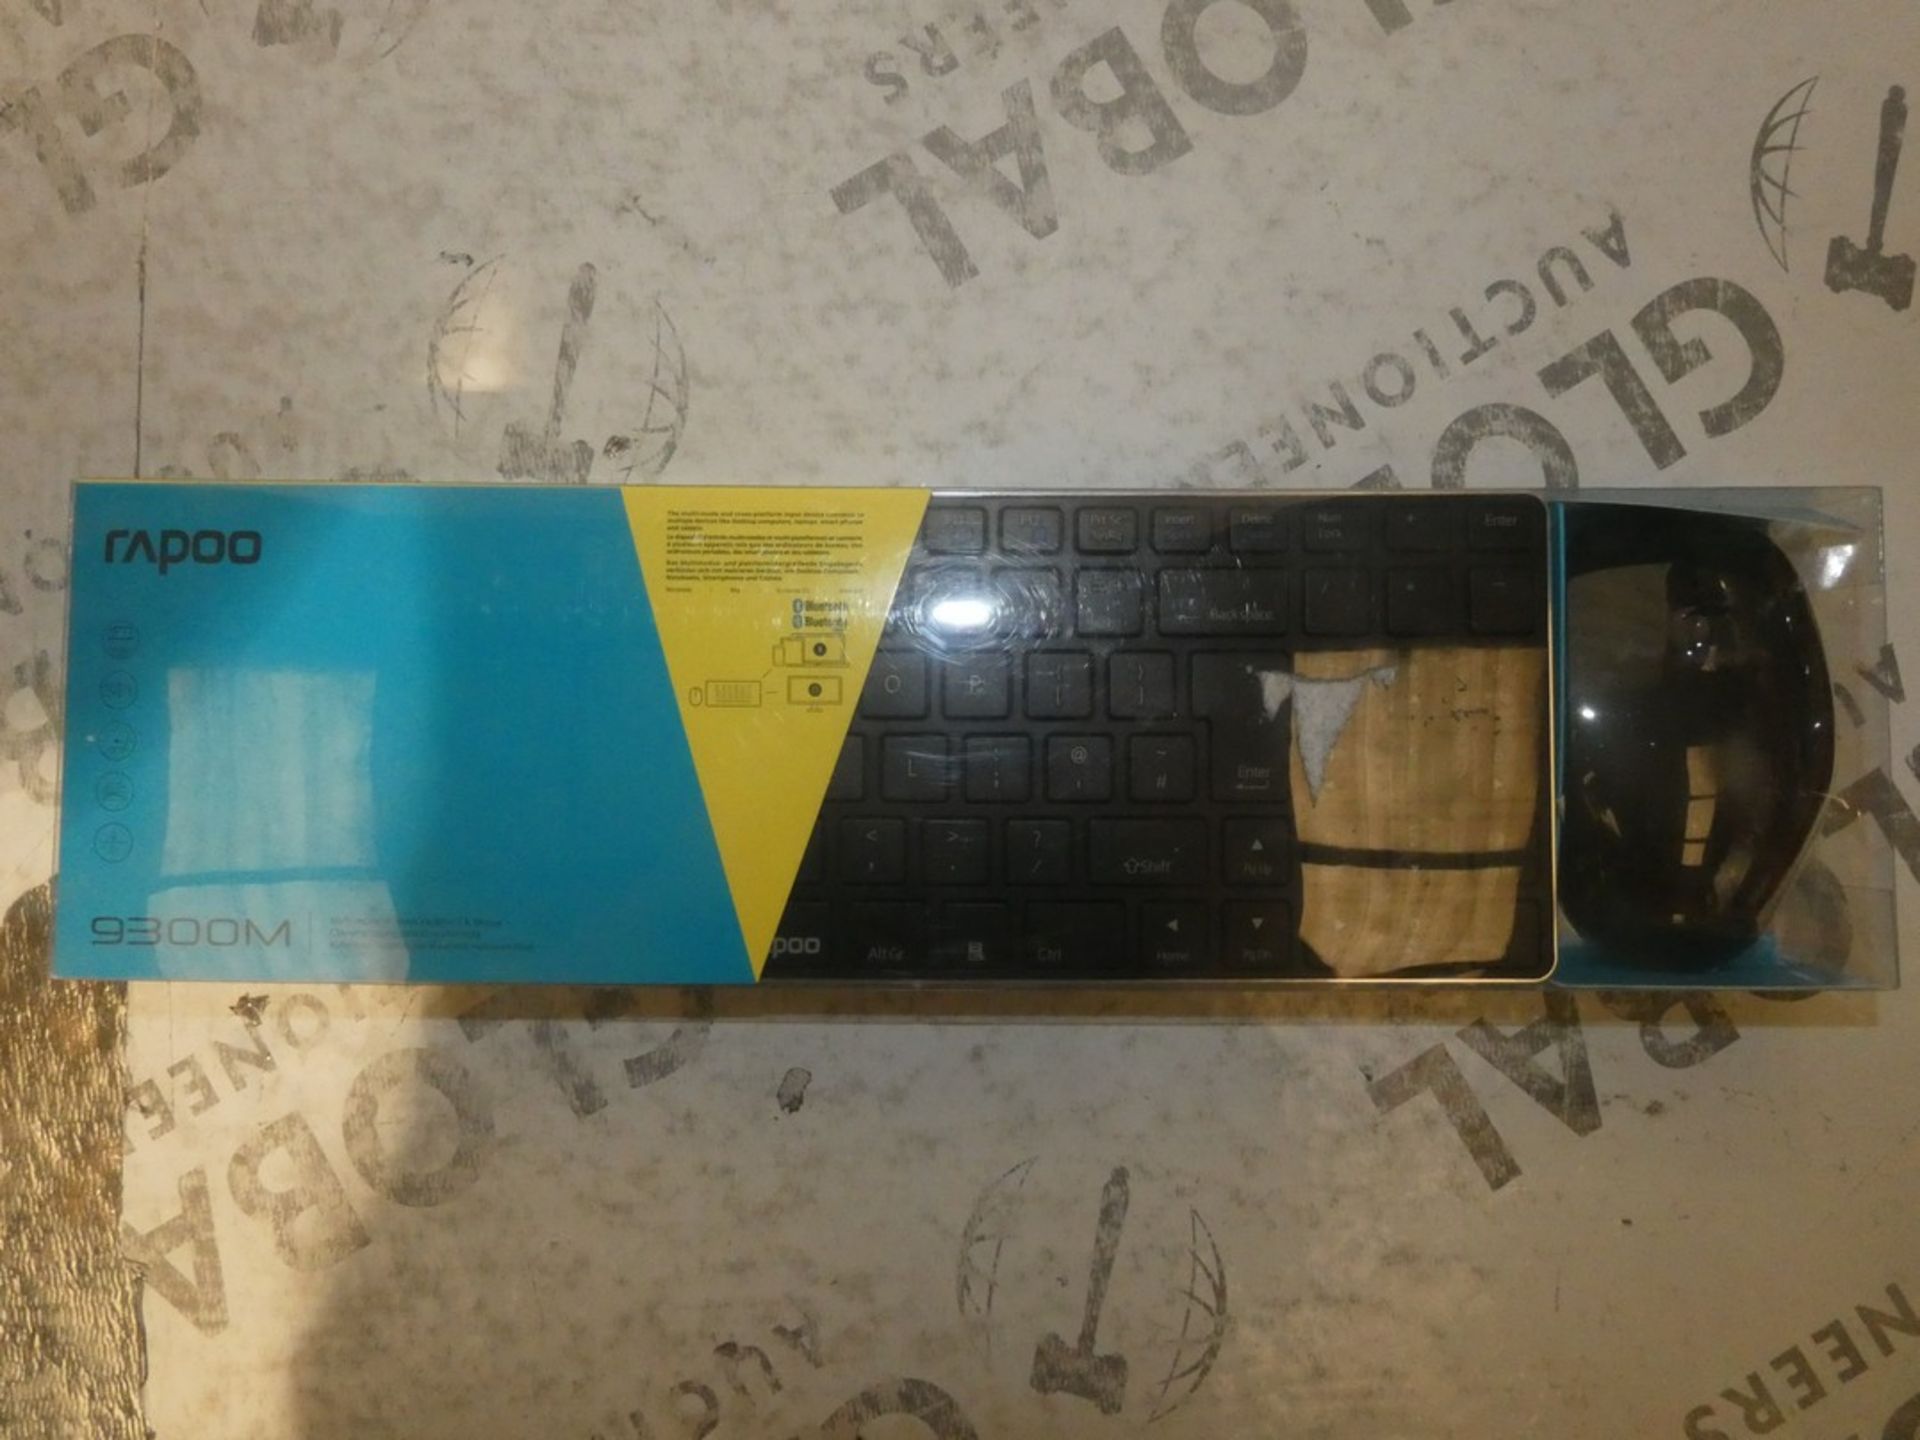 Boxed Rapoo 9300m Wireless Keyboard and Mouse Pack